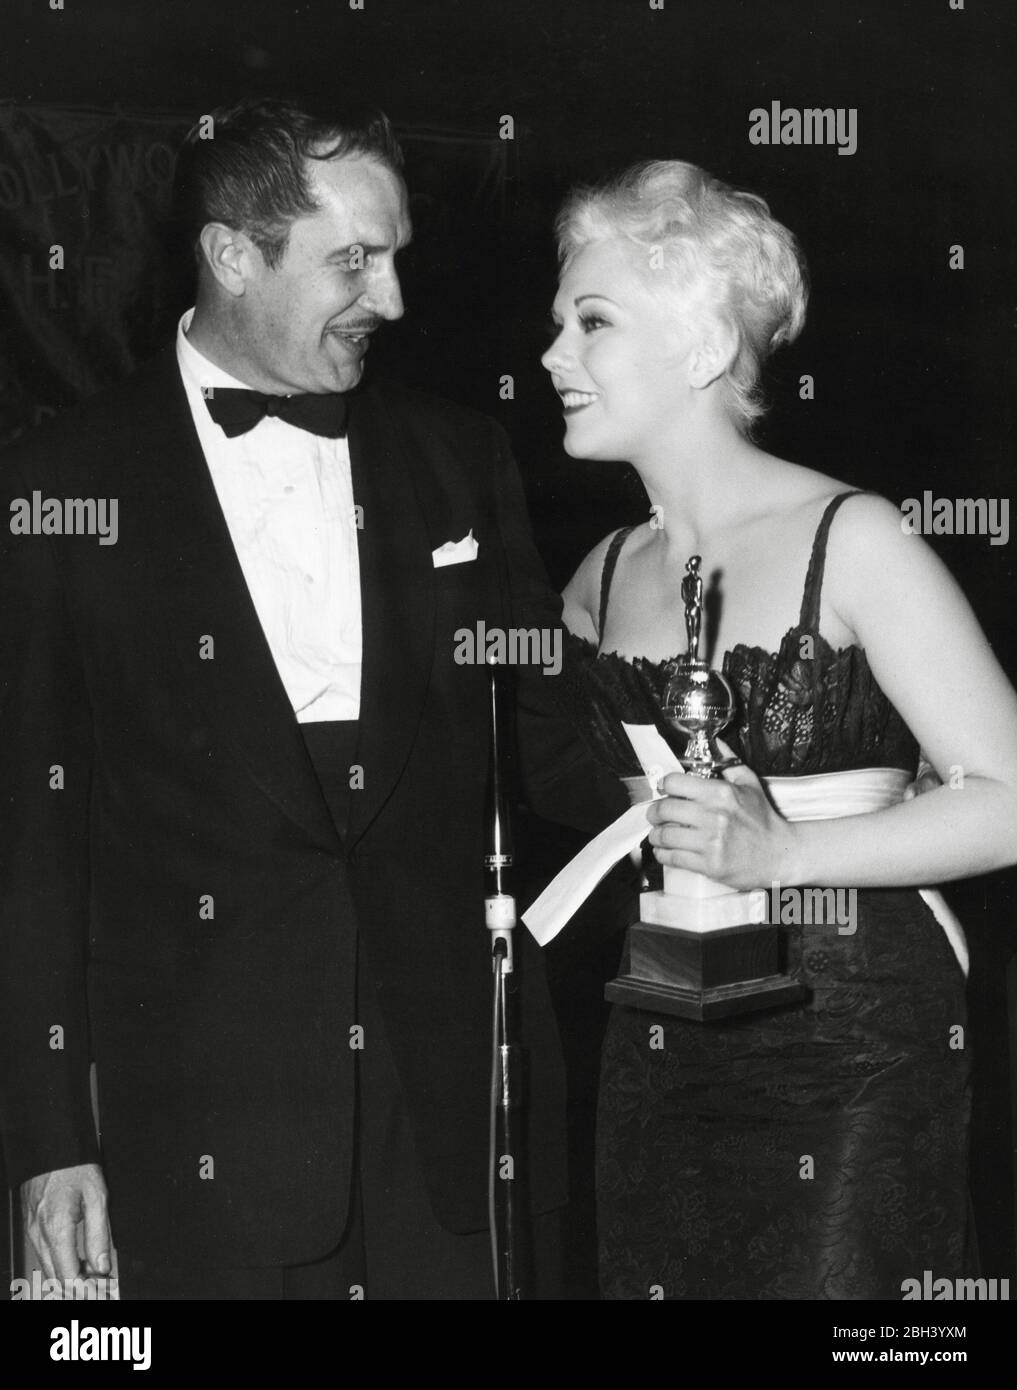 Kim Novak receives a special award as World Film Favorite, presented by Vincent Price, at the 14th Golden Globes, on Thursday, February 28, 1957, at the Cocoanut Grove, Ambassador Hotel.  File Reference # 33962-615THA Stock Photo